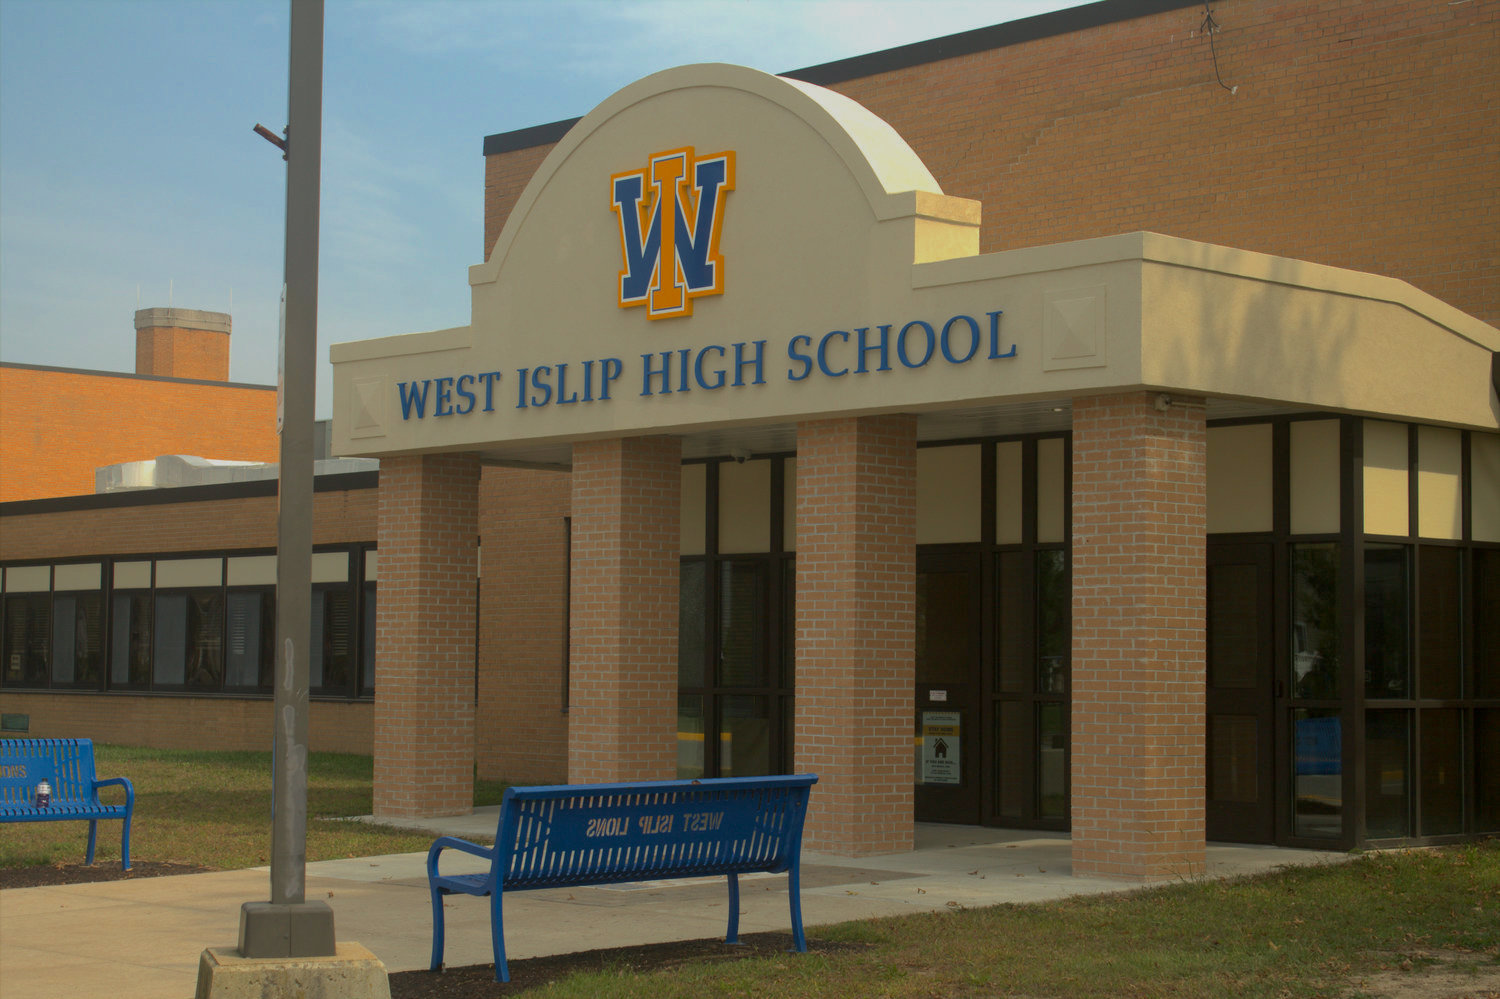 The West Islip Union Free School District approved a $127.5 million budget for 2021-2022 fiscal year at the April 20 school board meeting. The district will host a budget hearing on May 6 at Beach Street Middle School.